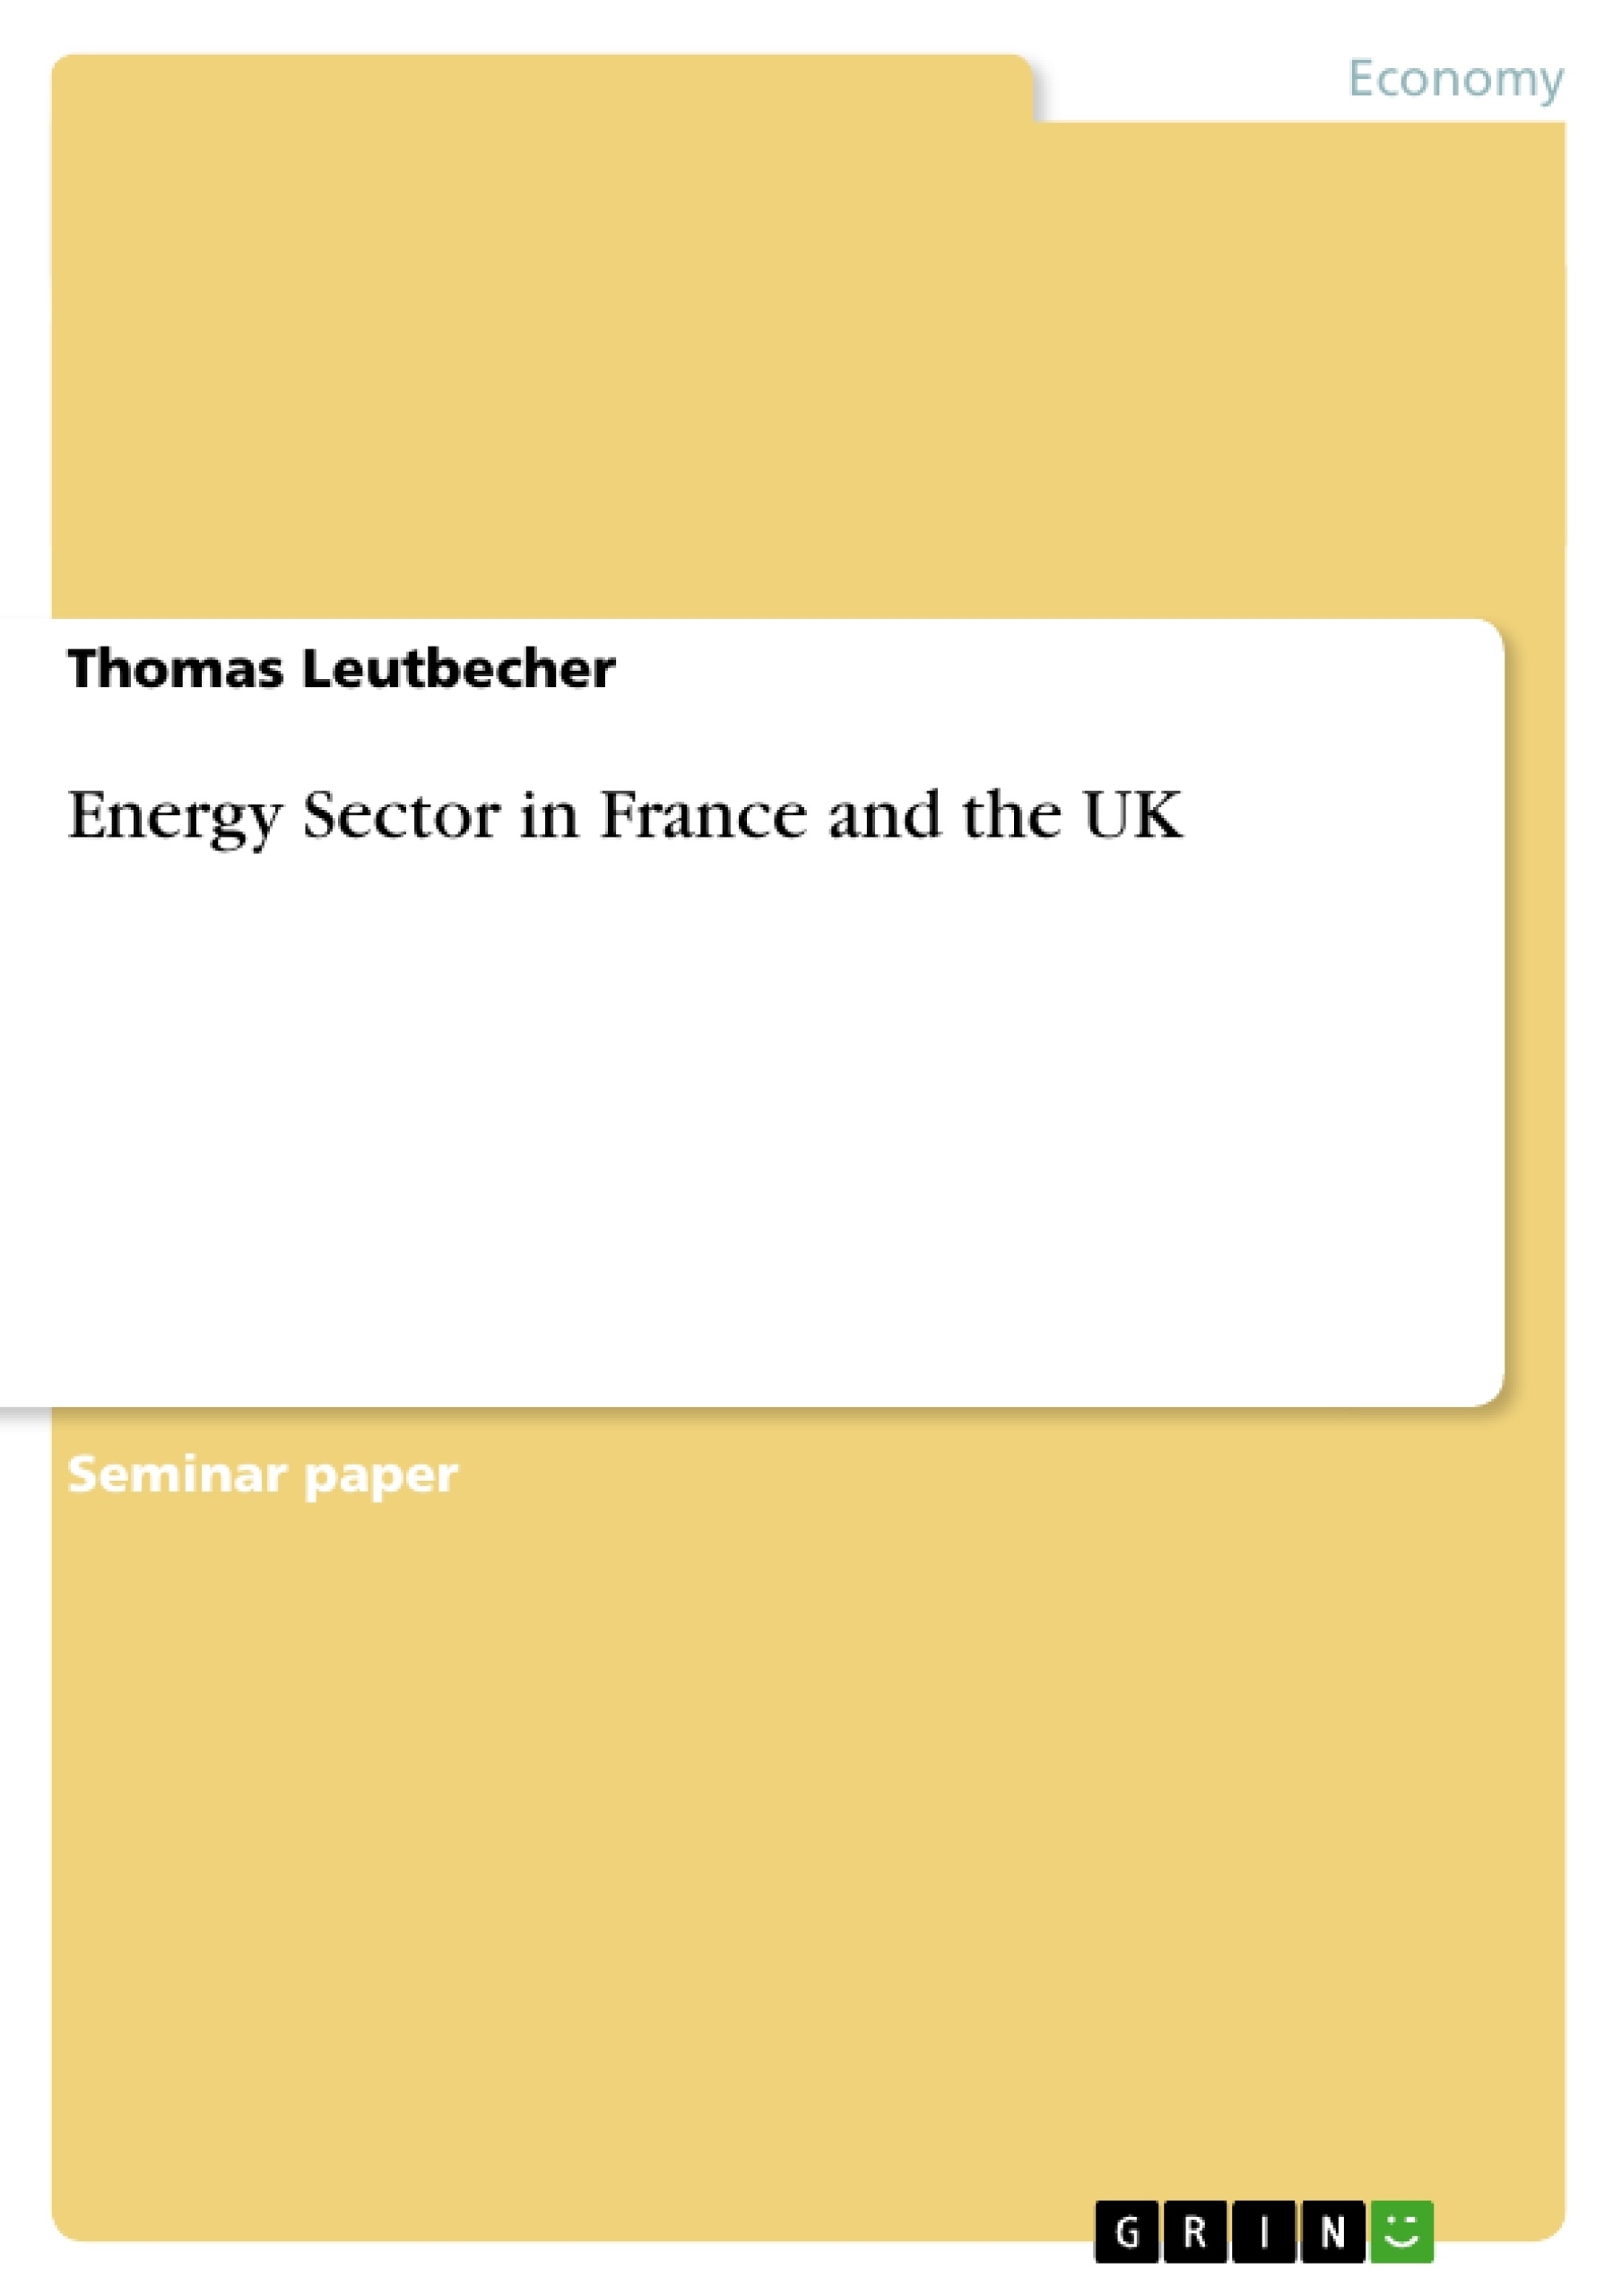 Title: Energy Sector in France and the UK